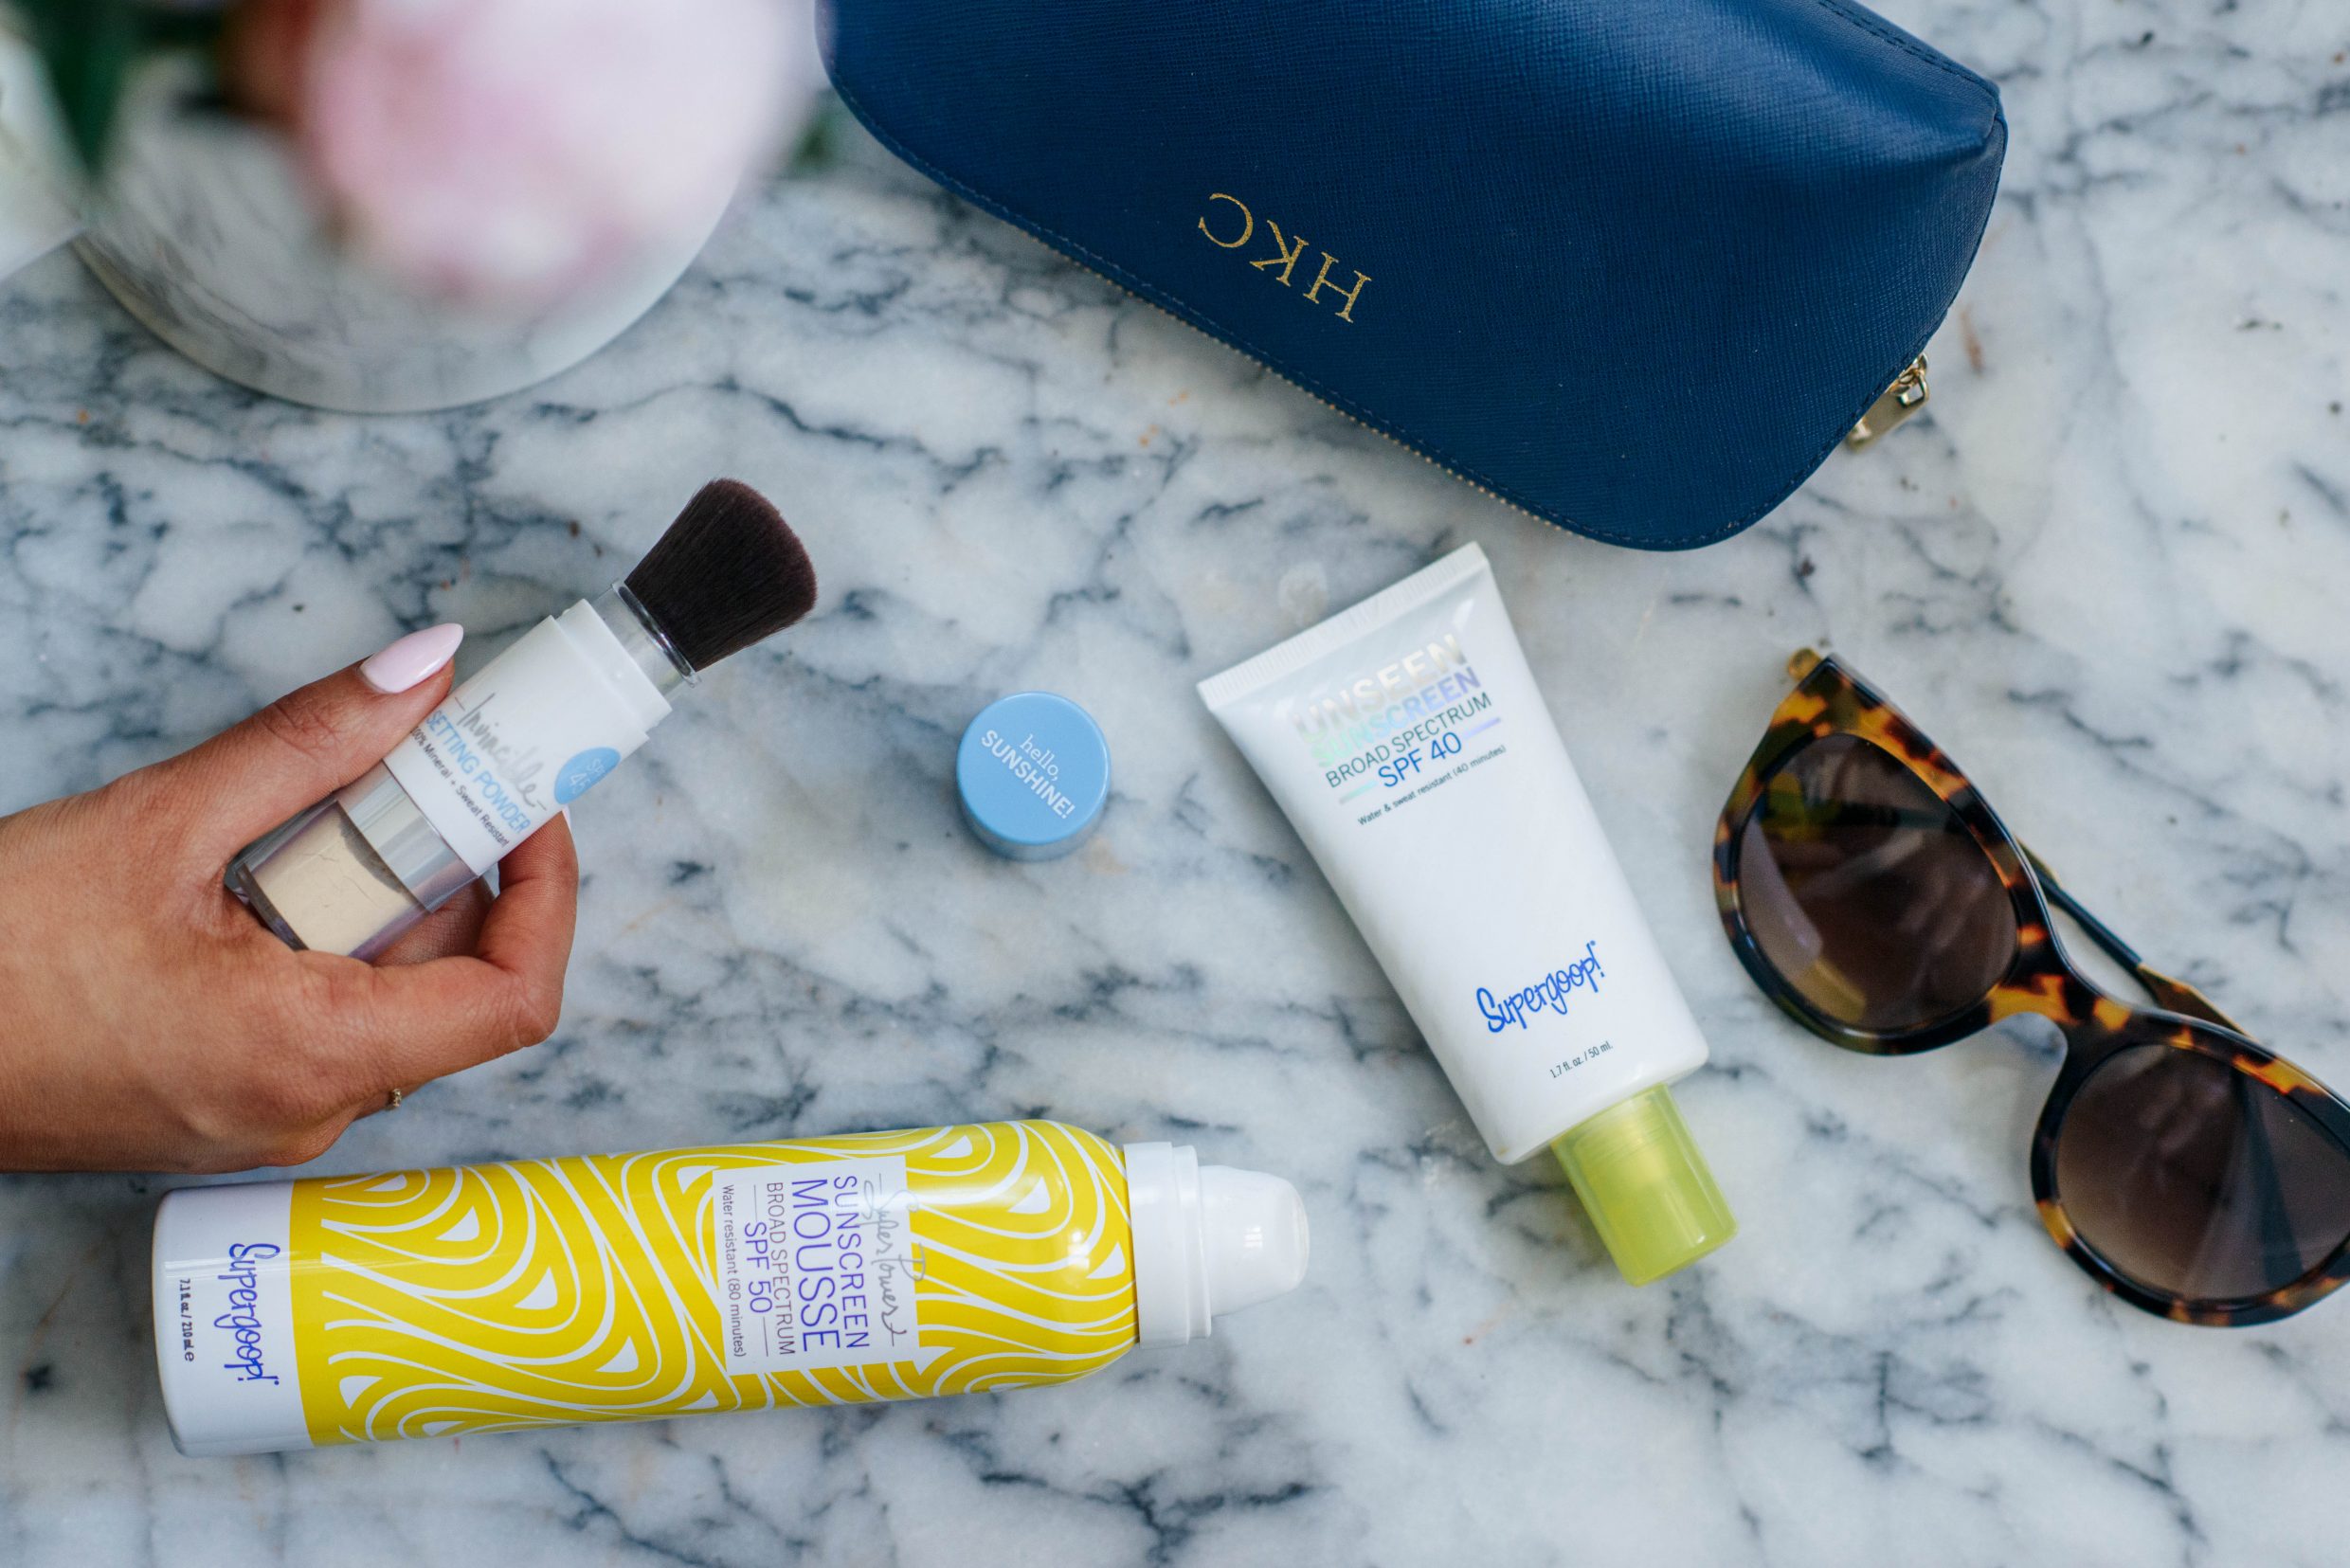 Supergoop! Favorites including the Unseen Sunscreen, Invincible Setting Powder and Sunscreen Mousse